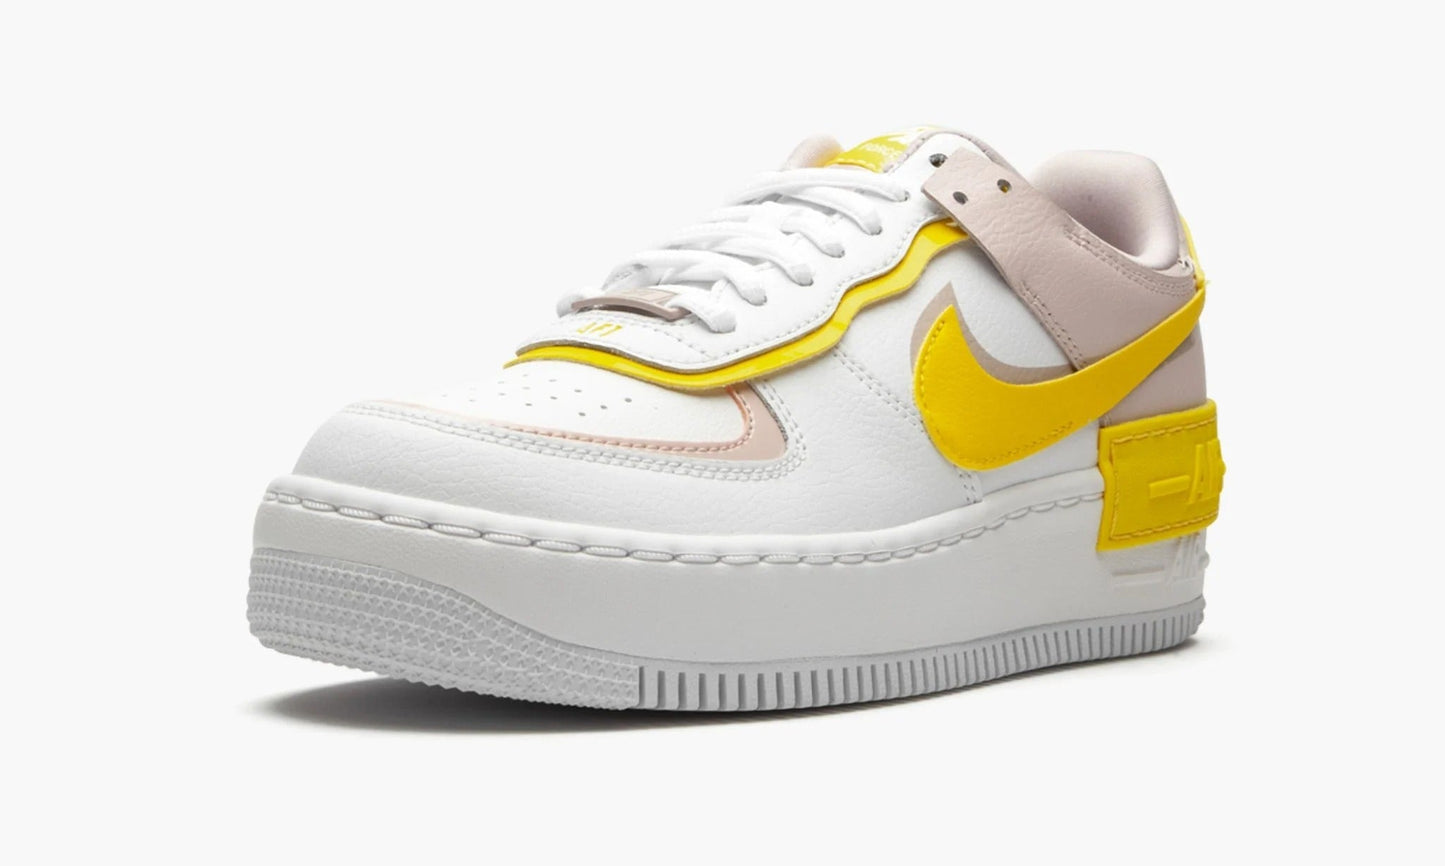 Air Force 1 Low Shadow WMNS “White Barely Rose Speed Yellow” - CJ1641 102